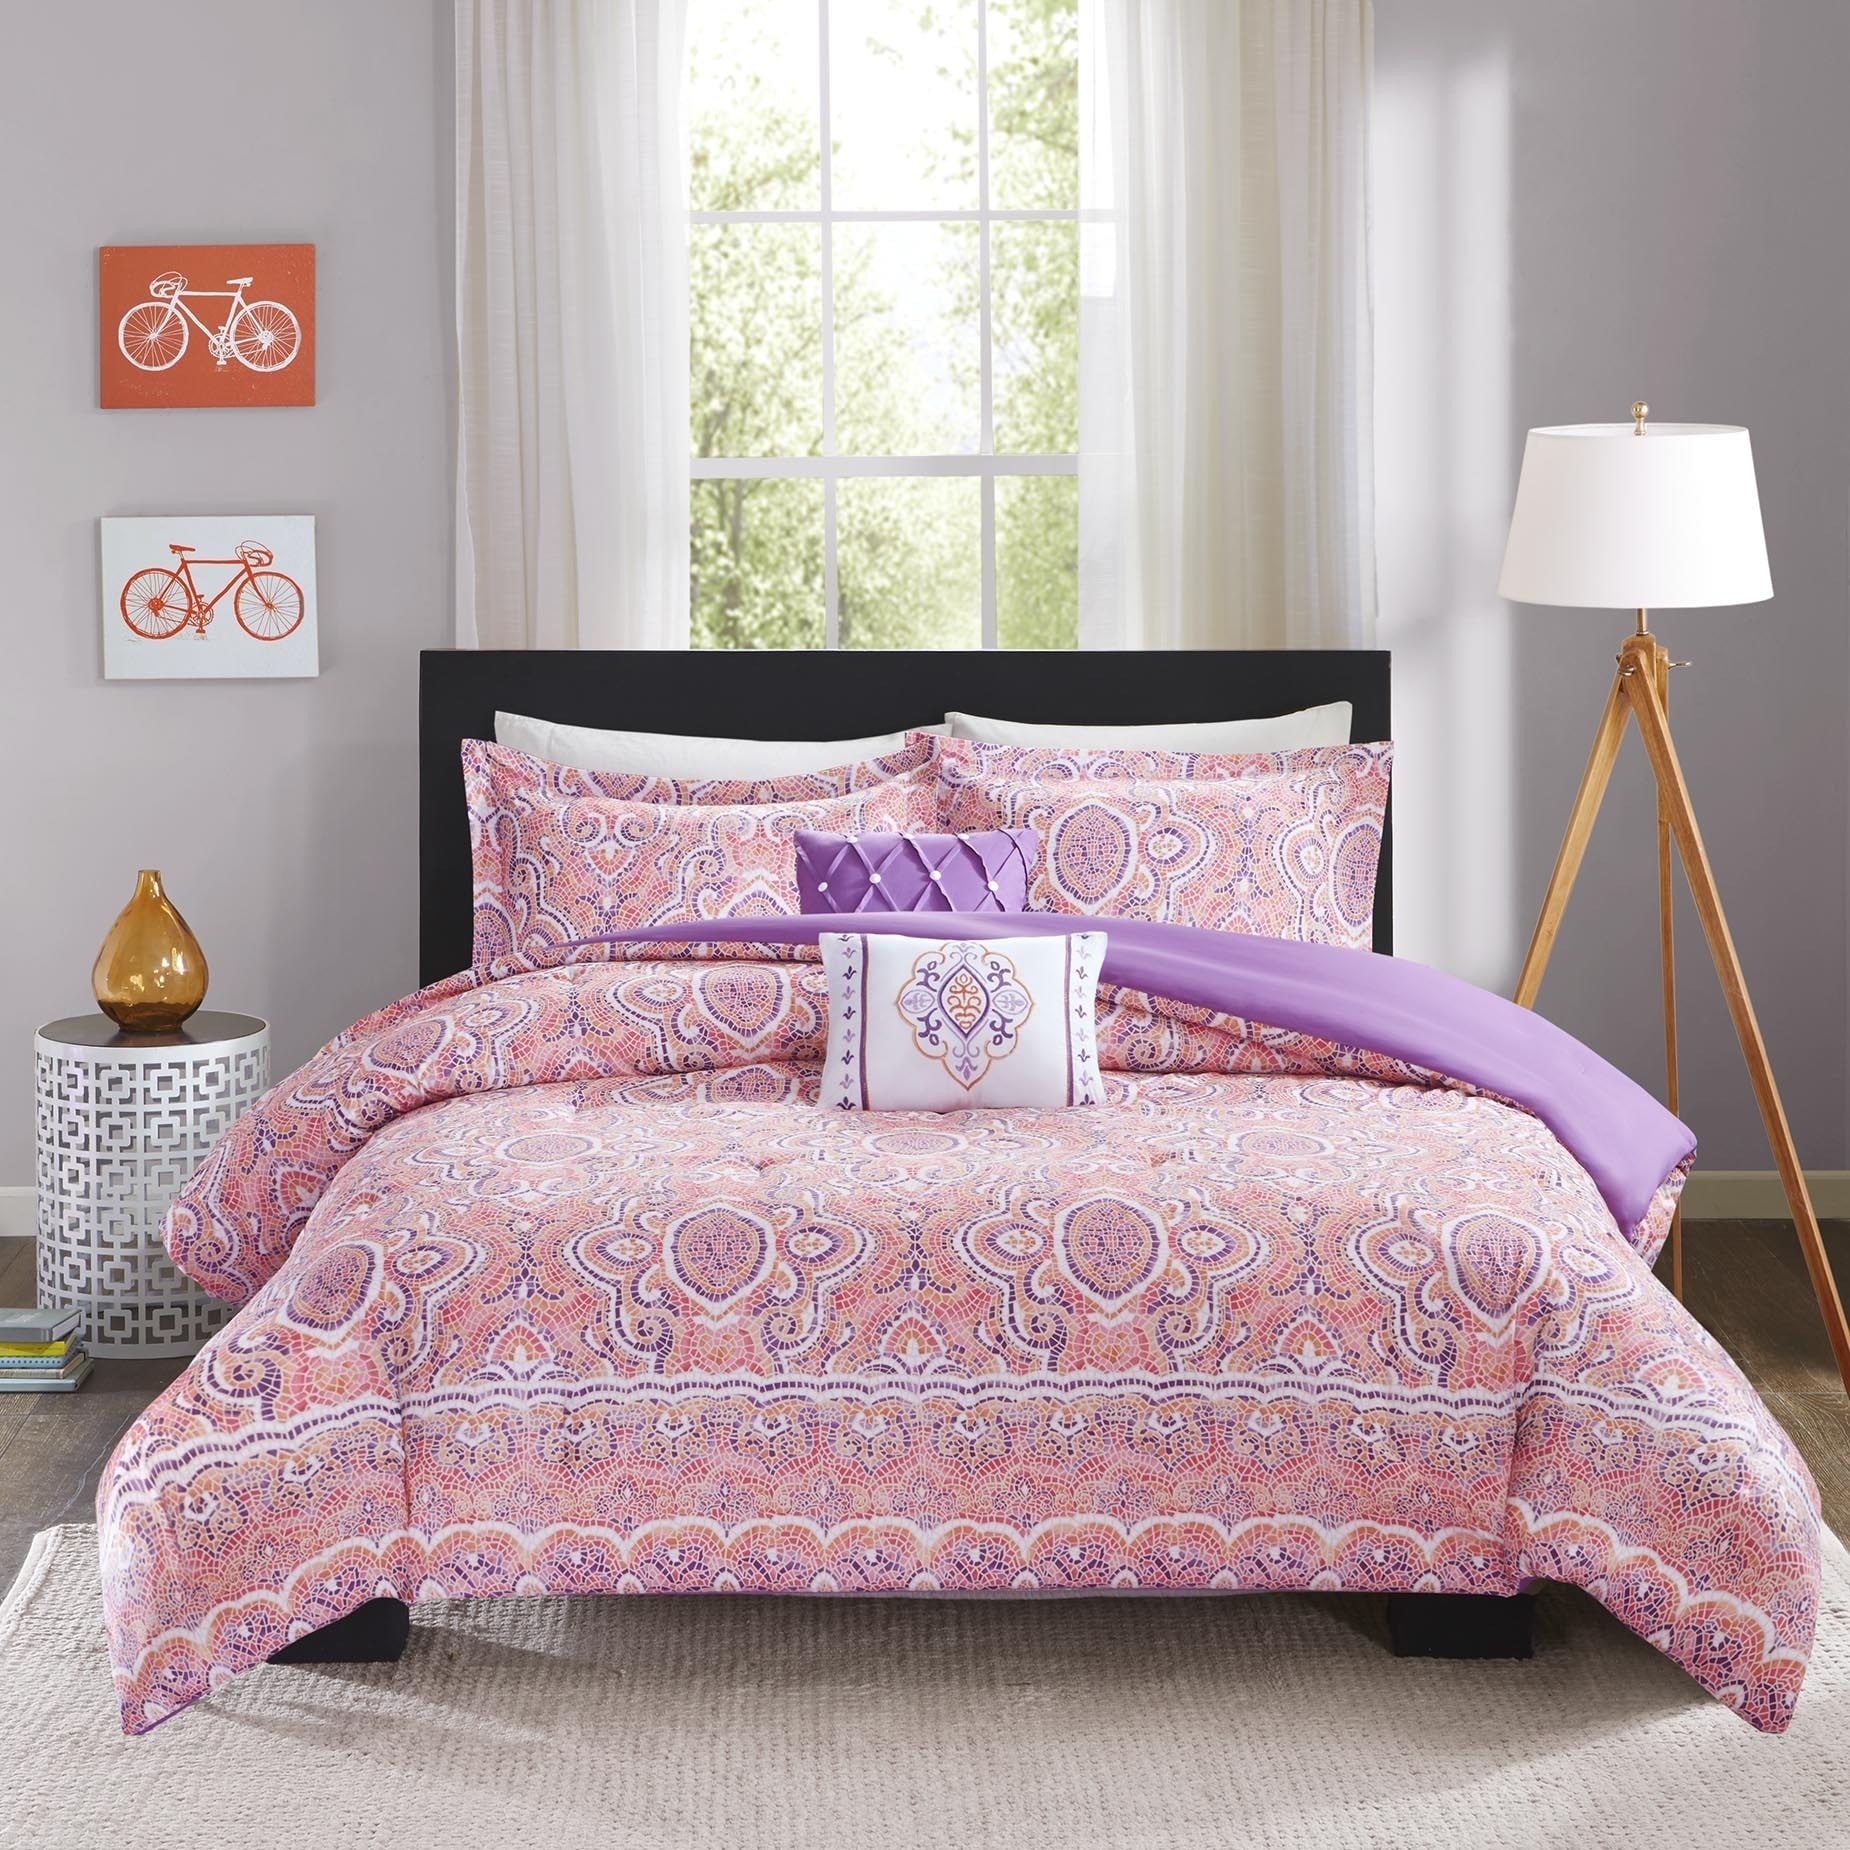 Pink Bedding – Best Selection of Pink Colored Bedding & Sets ...